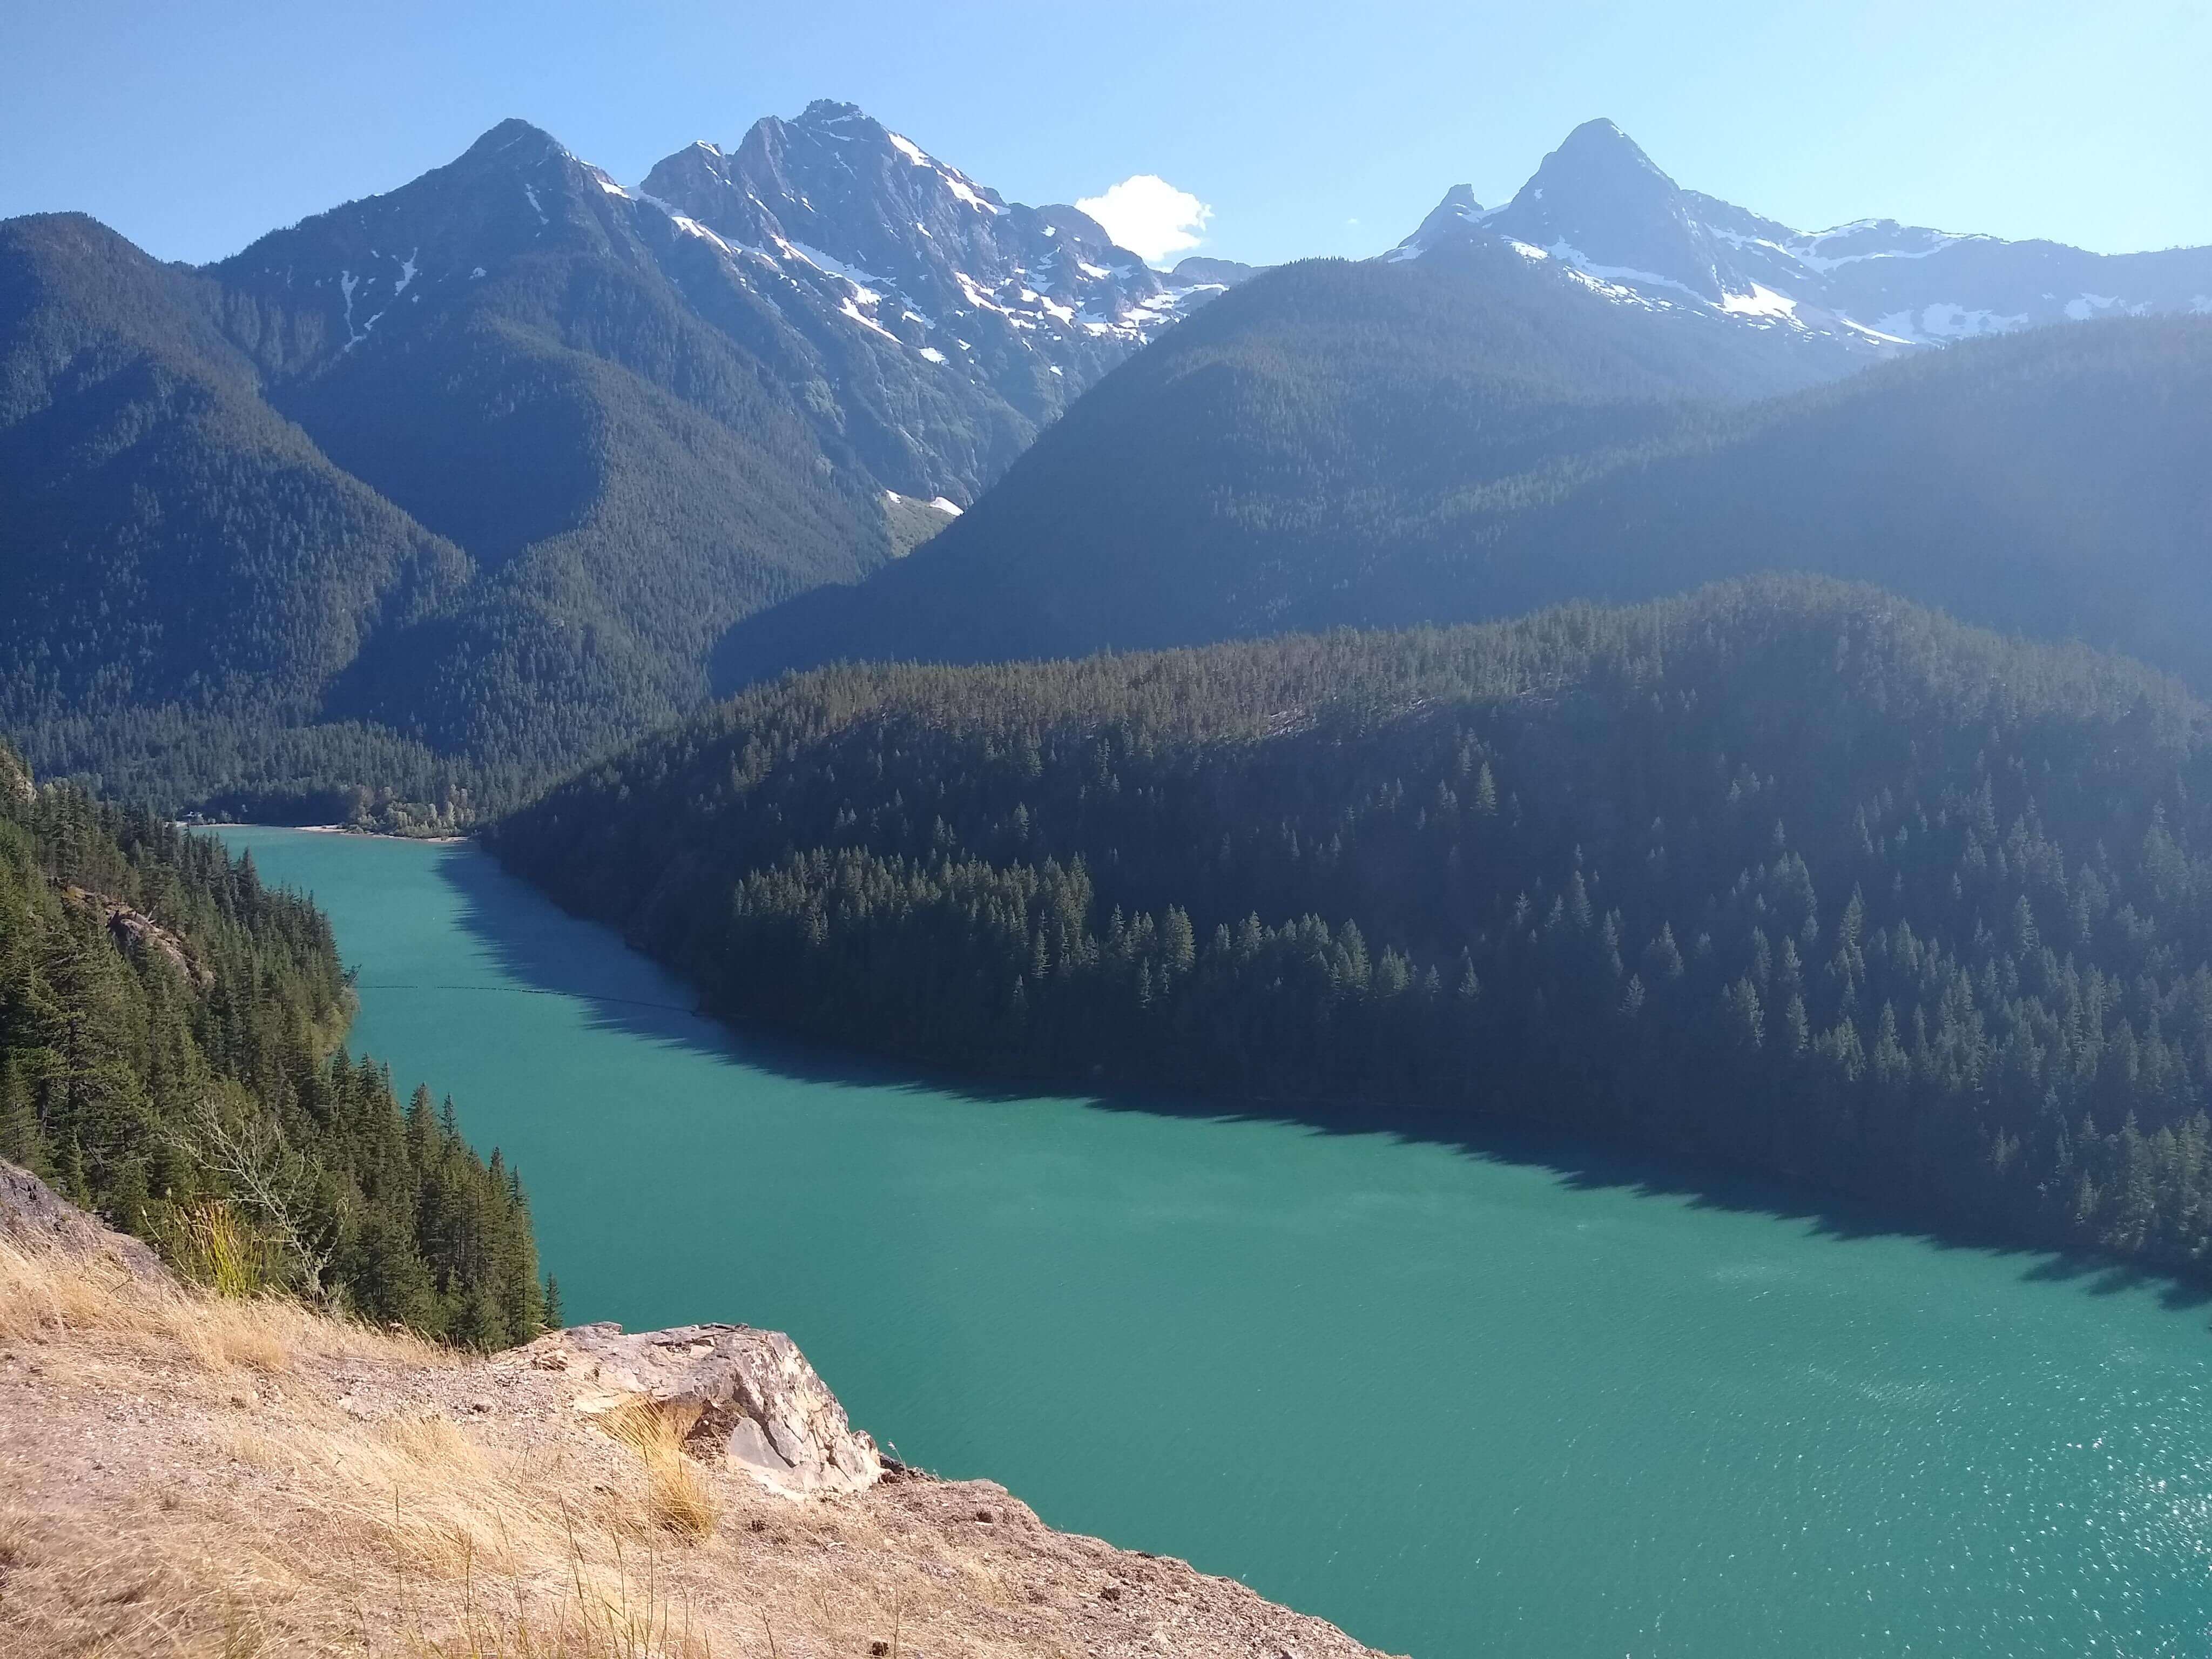 Sharp mountain peaks tower above turquoise water in North Cascades National Park